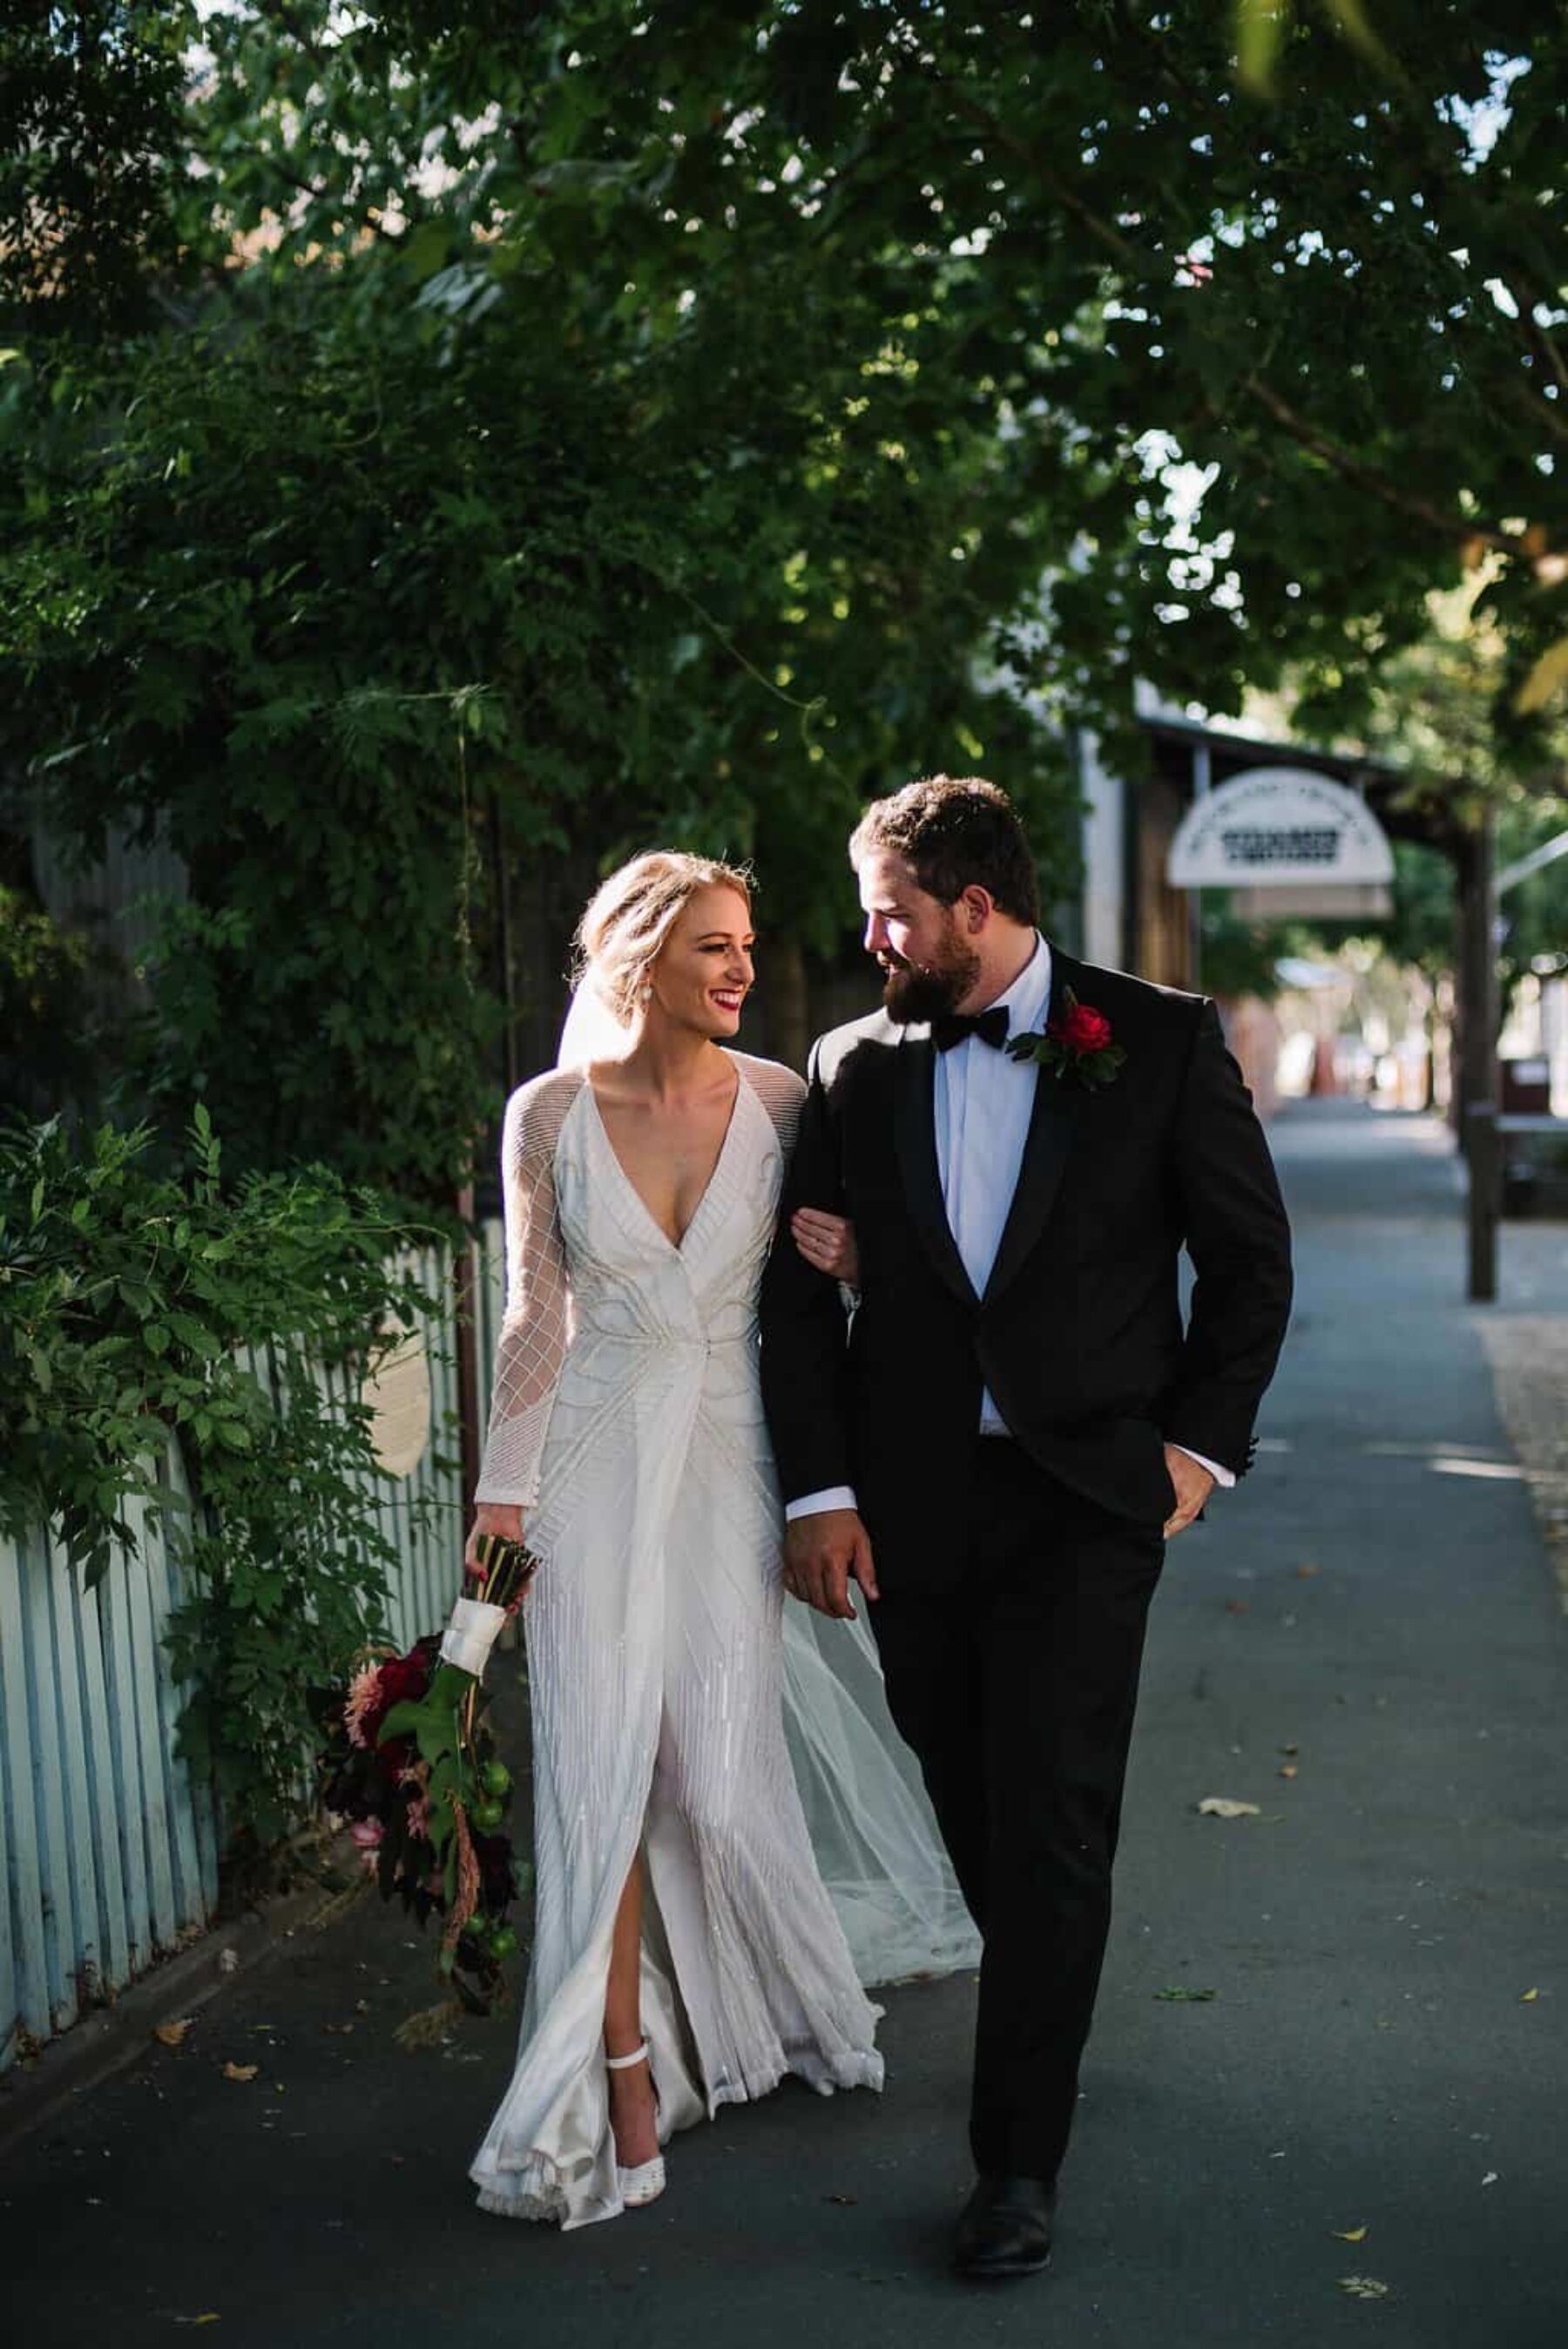 art-deco inspired wedding in Echuca VIC - photography by Tess Follet